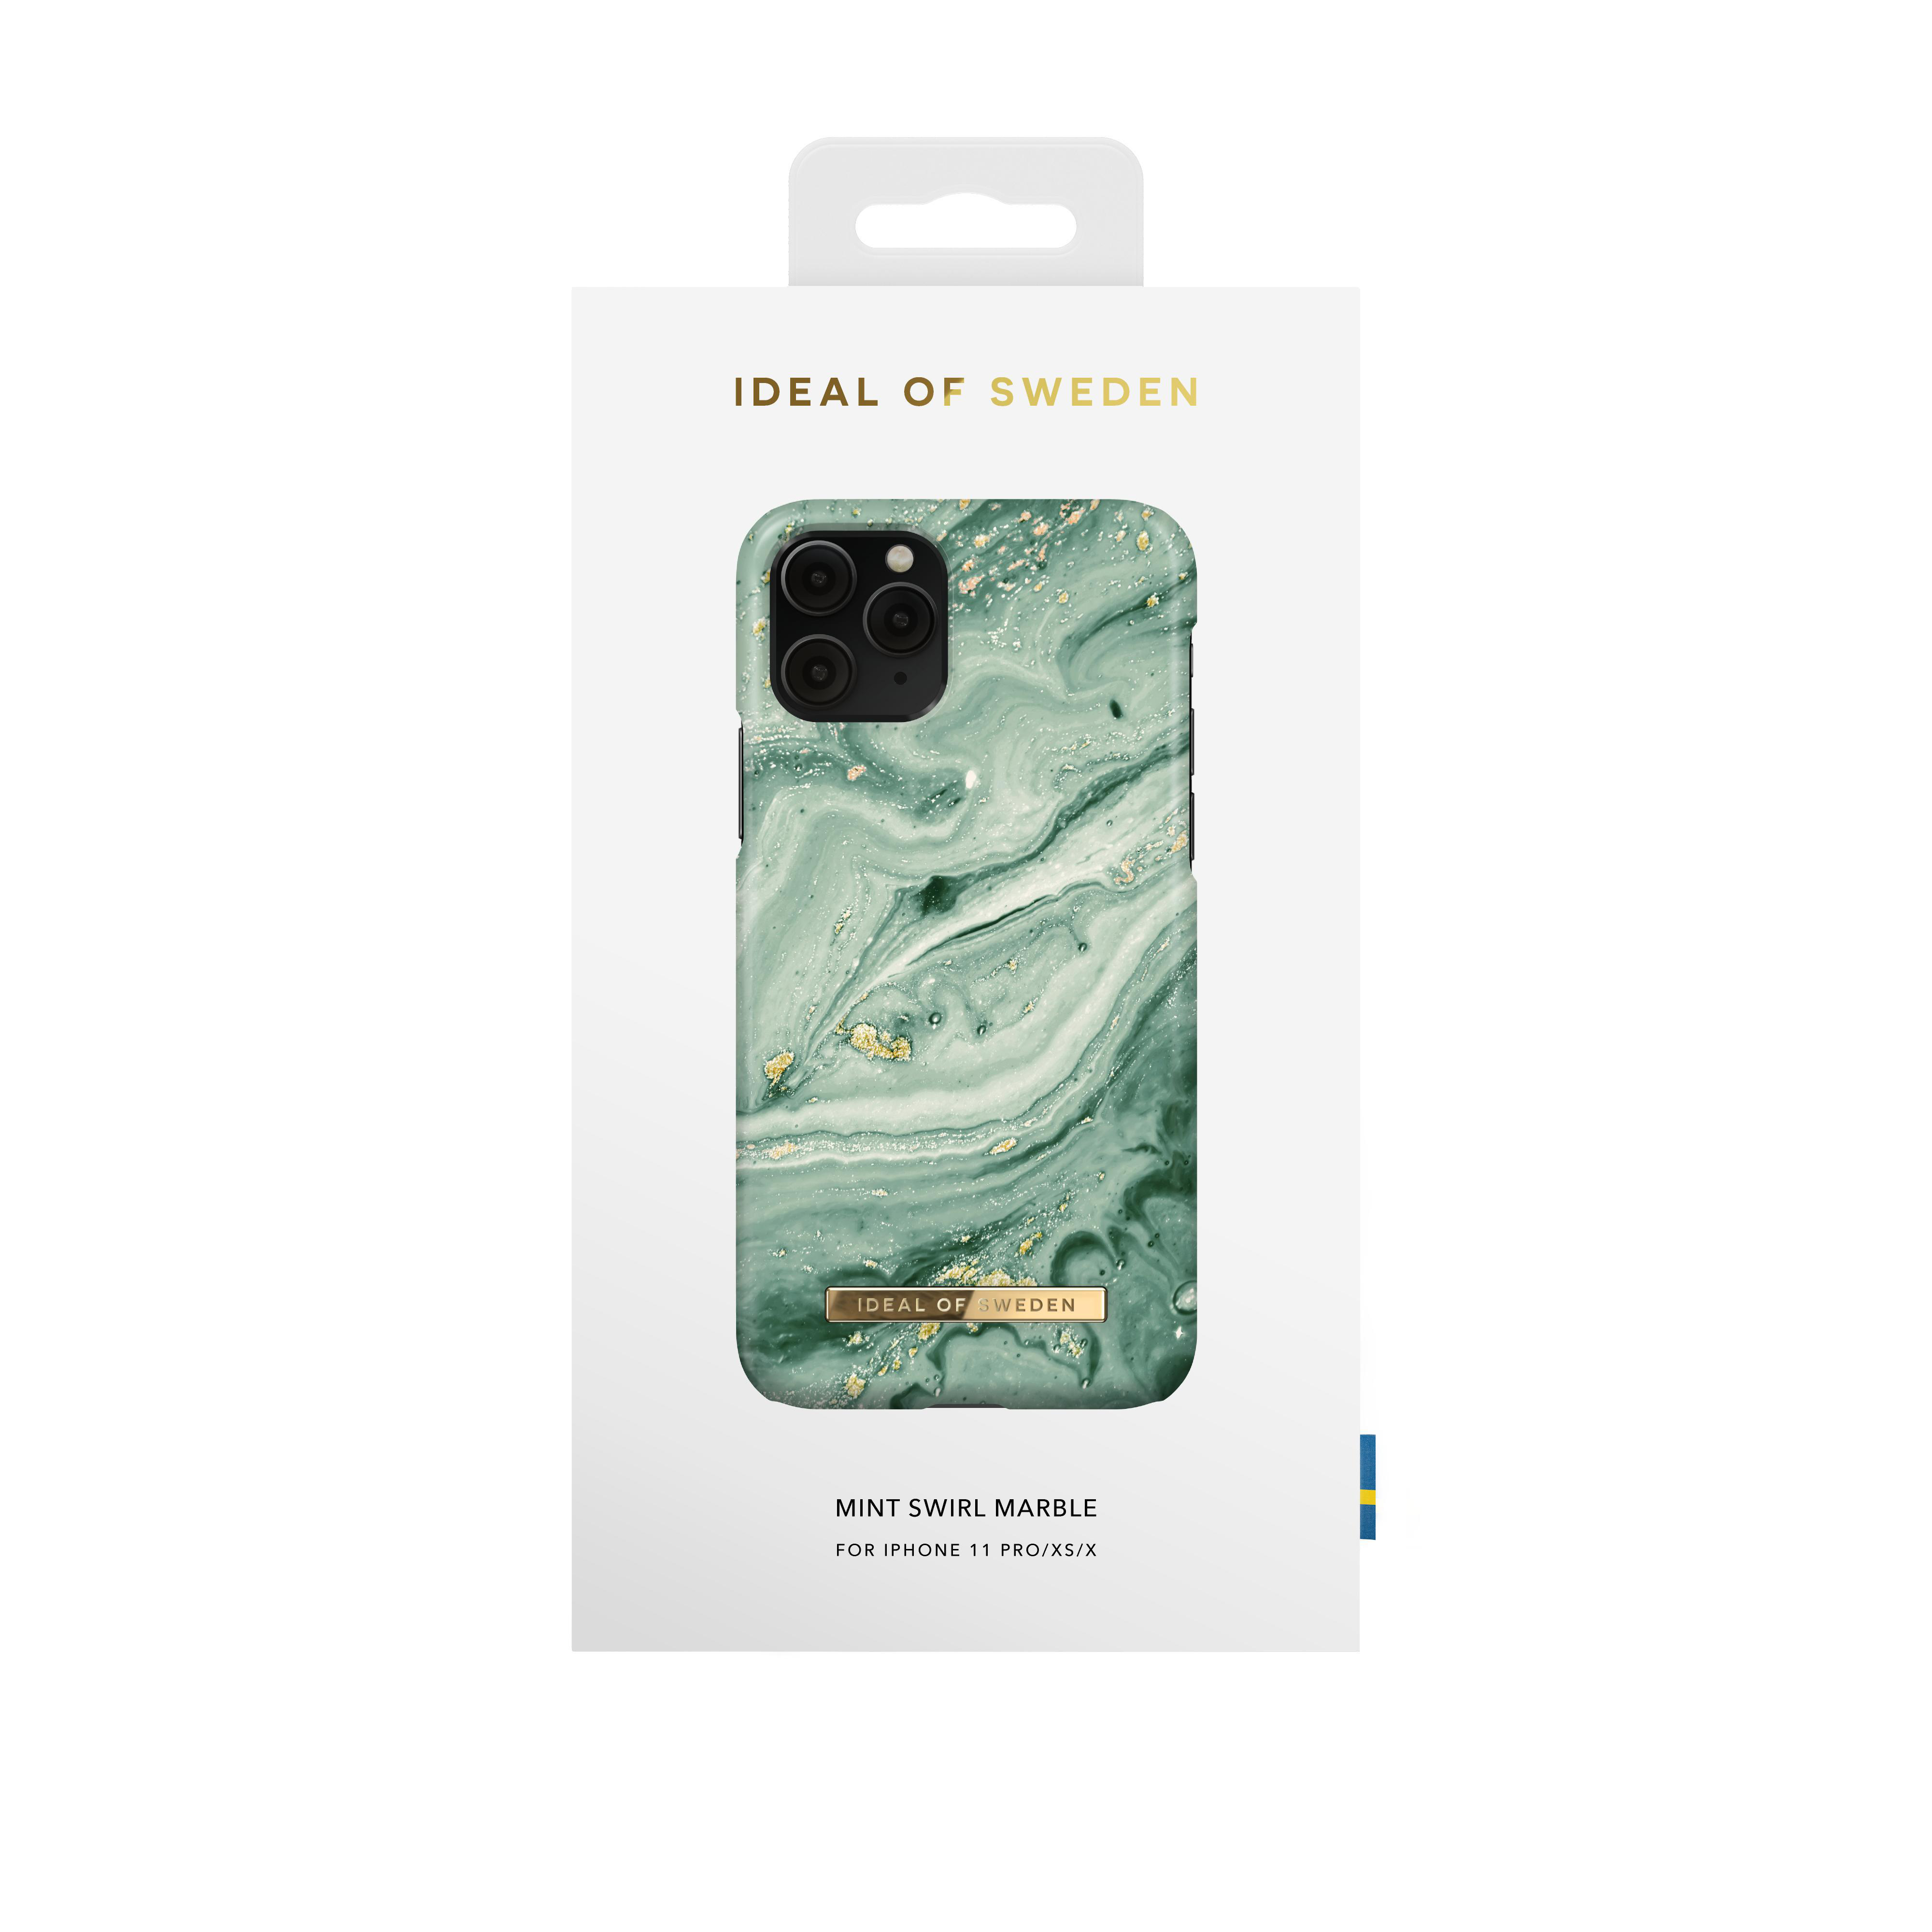 IDEAL OF SWEDEN Fashion, 11 Pro, Green iPhone iPhone Backcover, Apple, XS, X, iPhone